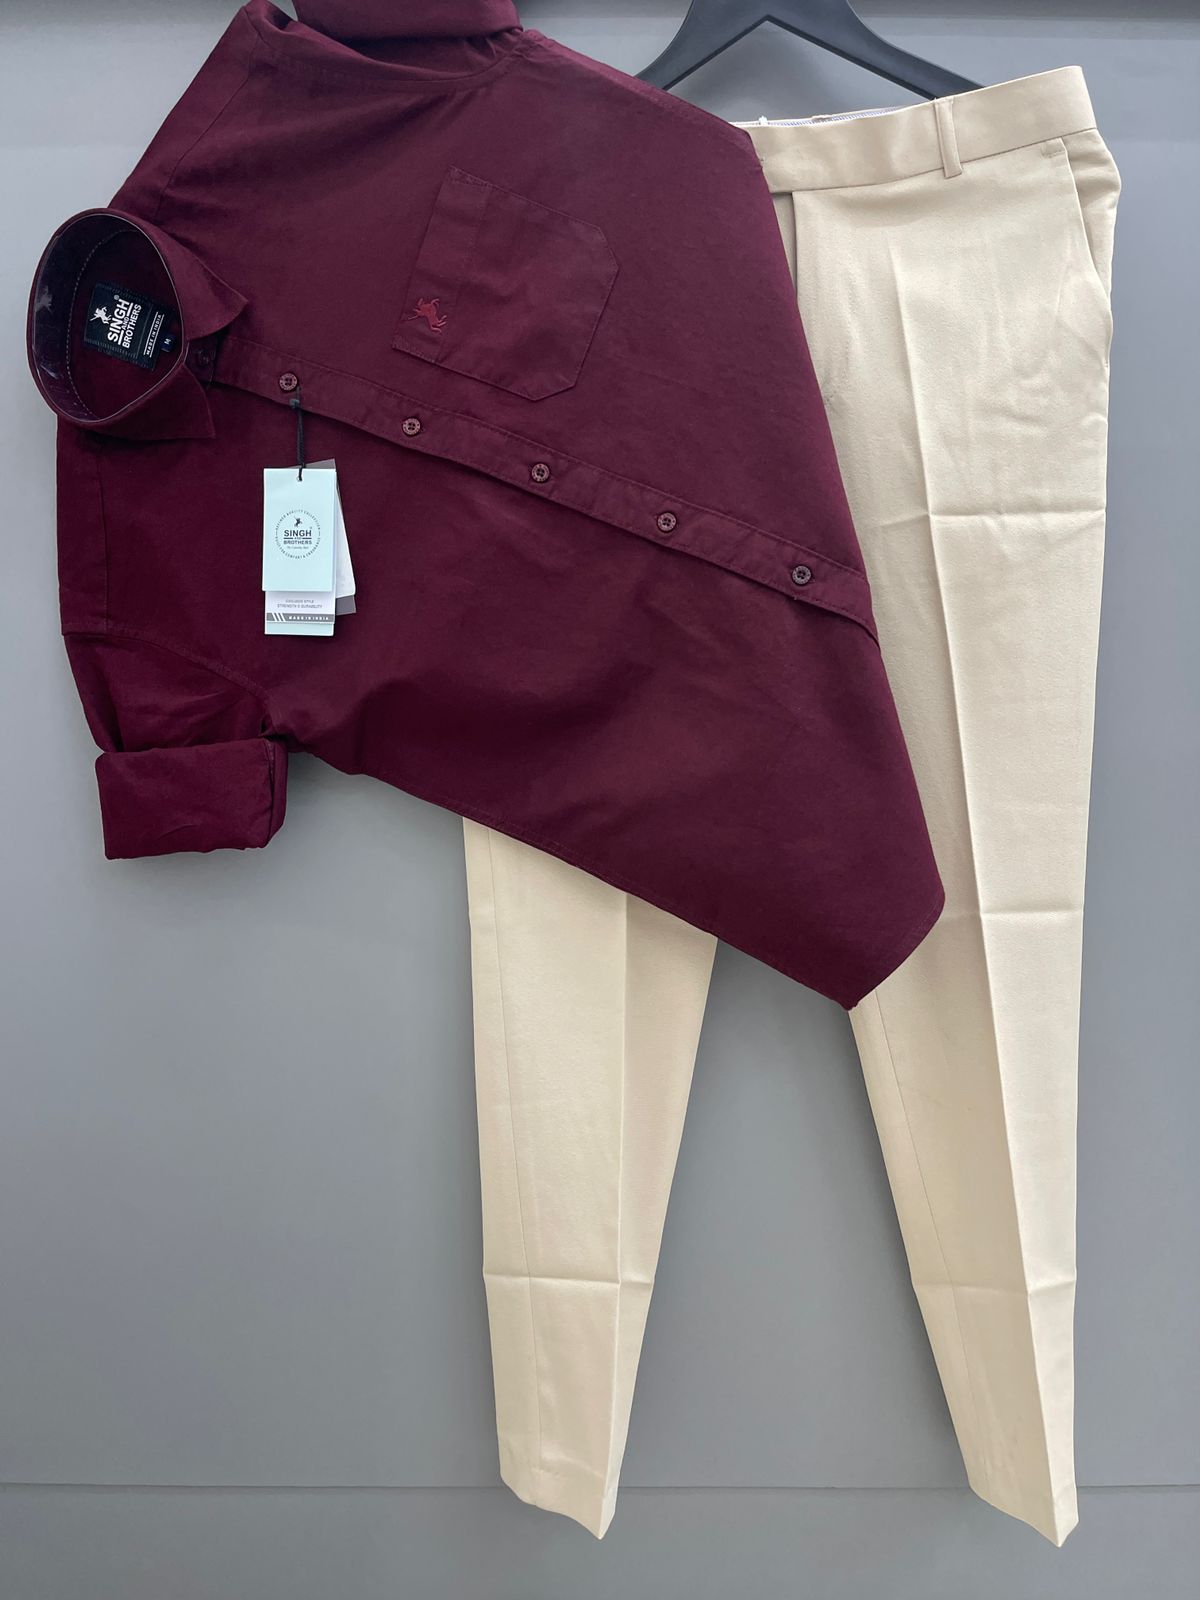 What shade of grey pants go with a maroon shirt? - Quora